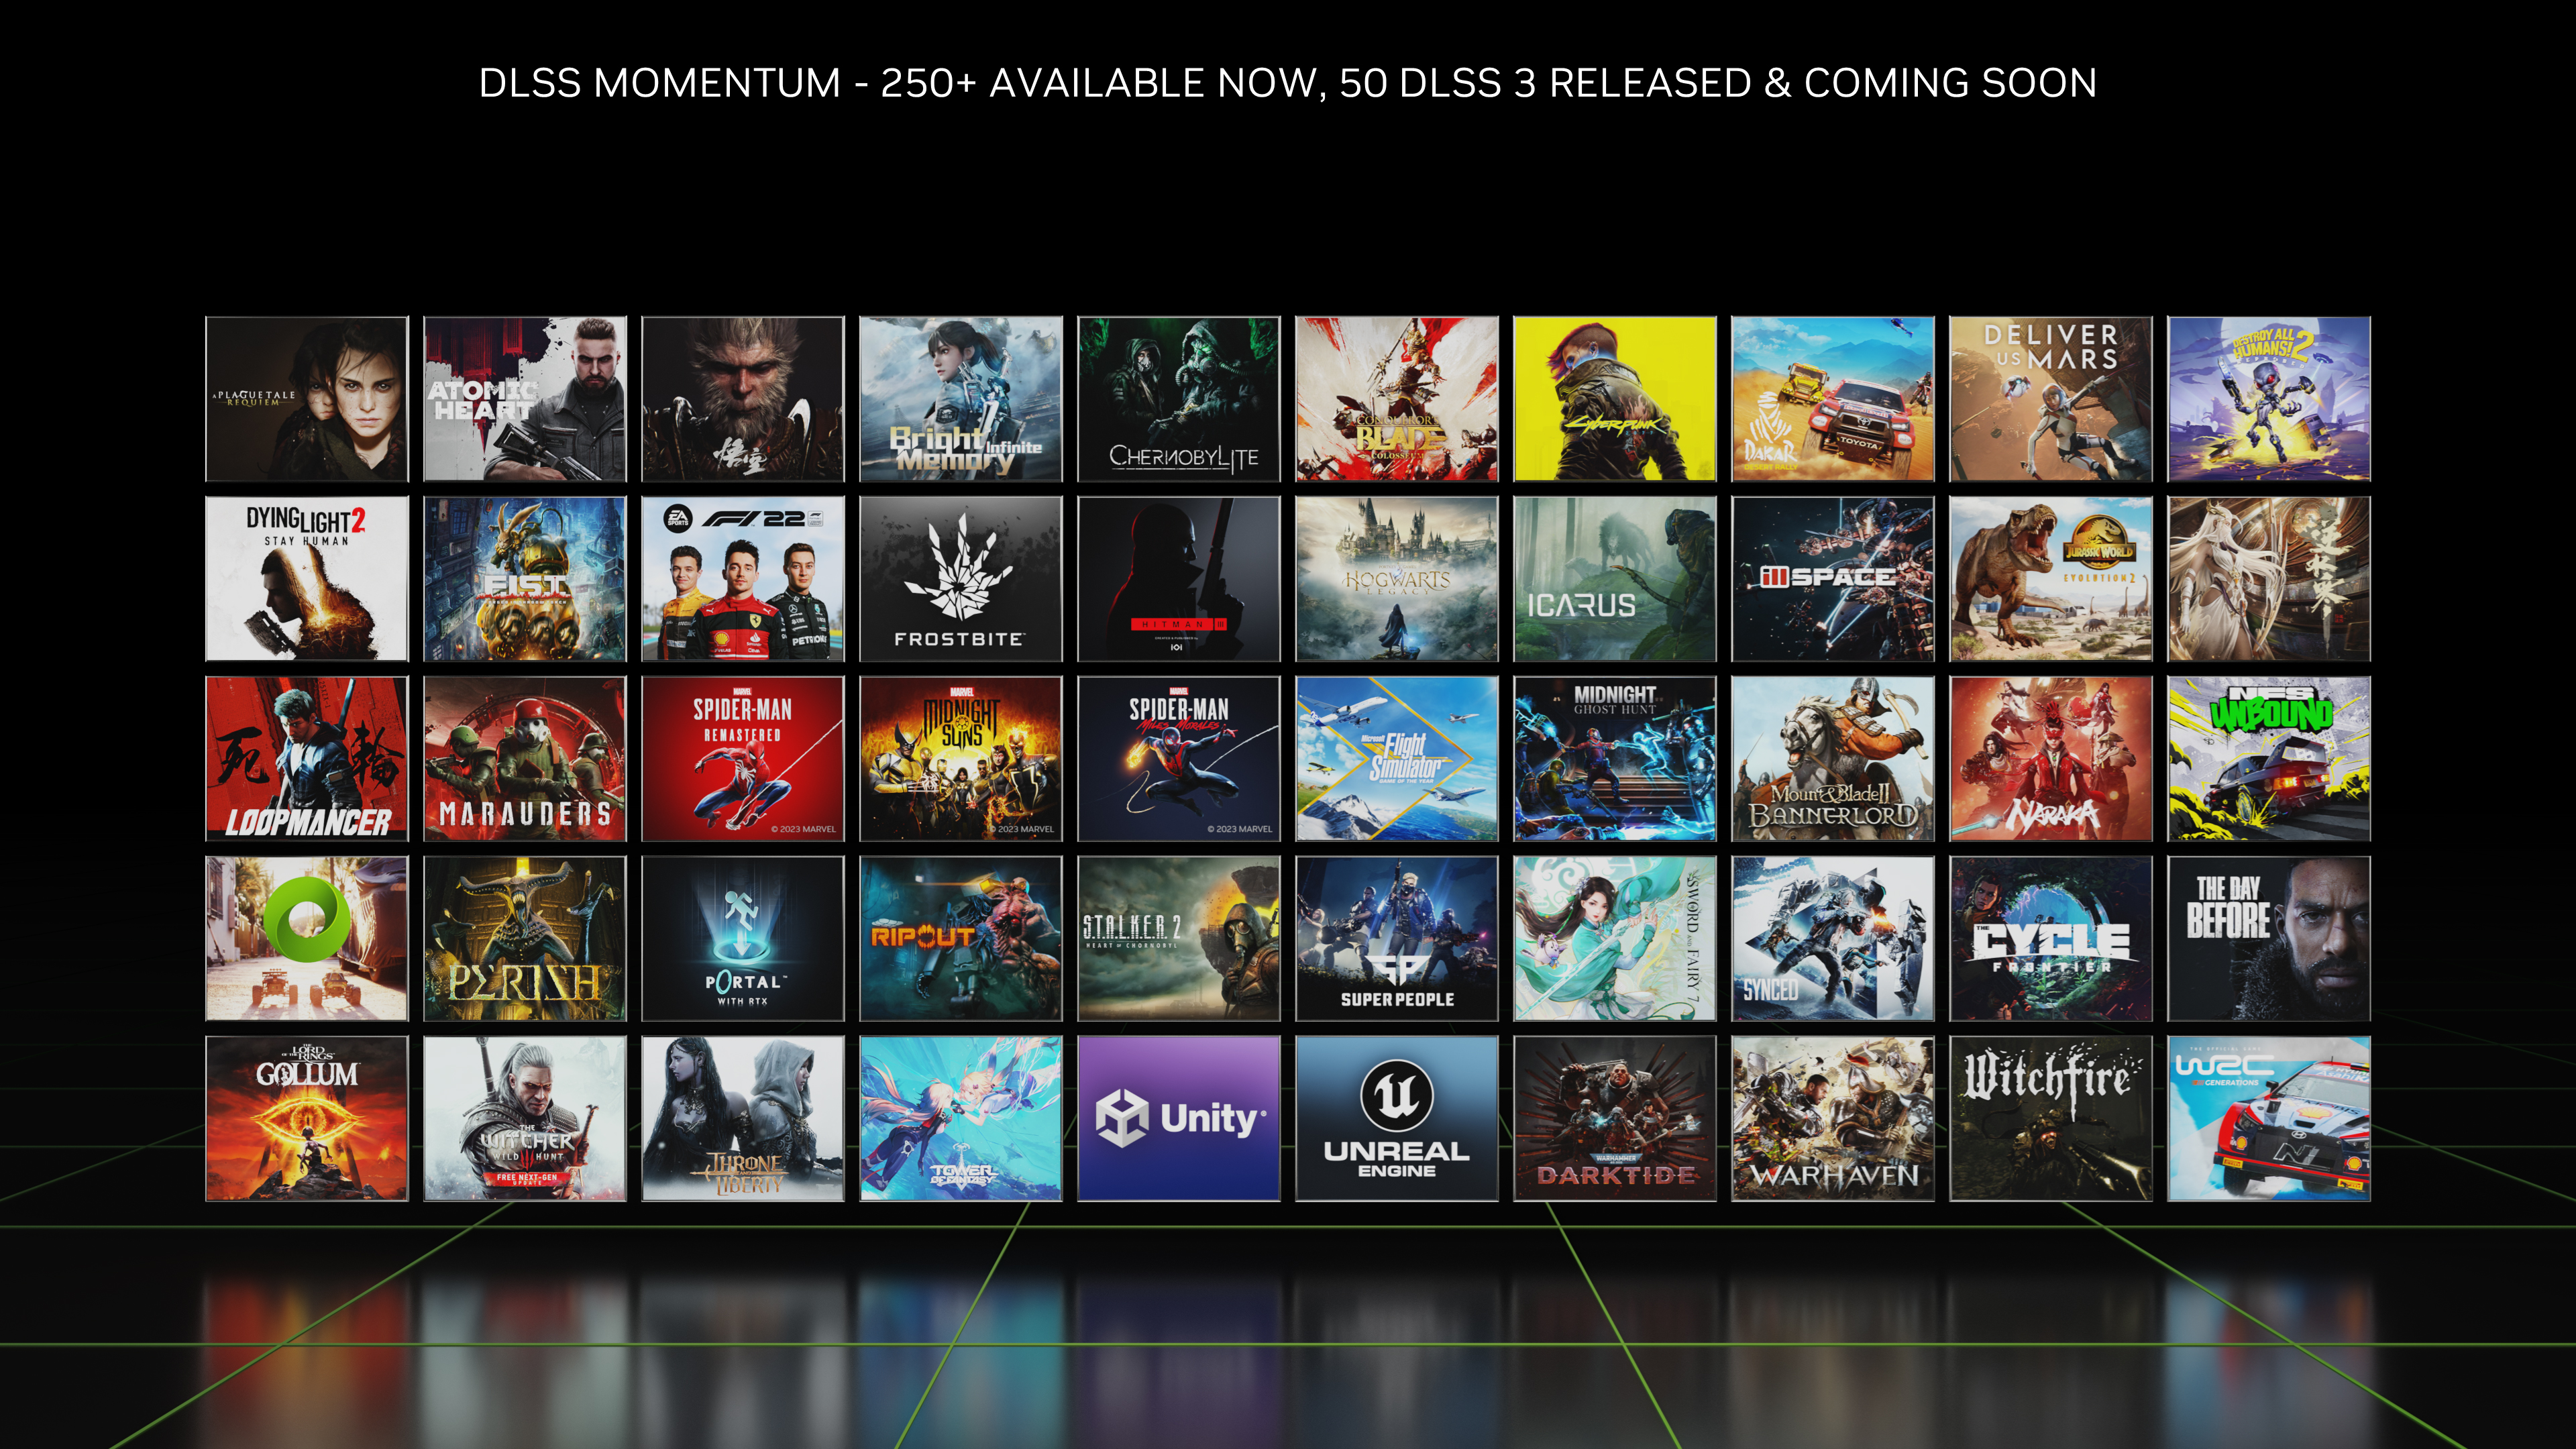 DLSS Momentum Continues: 50 Released and Upcoming DLSS 3 Games, Over 250  DLSS Games and Creative Apps Available Now | GeForce News | NVIDIA